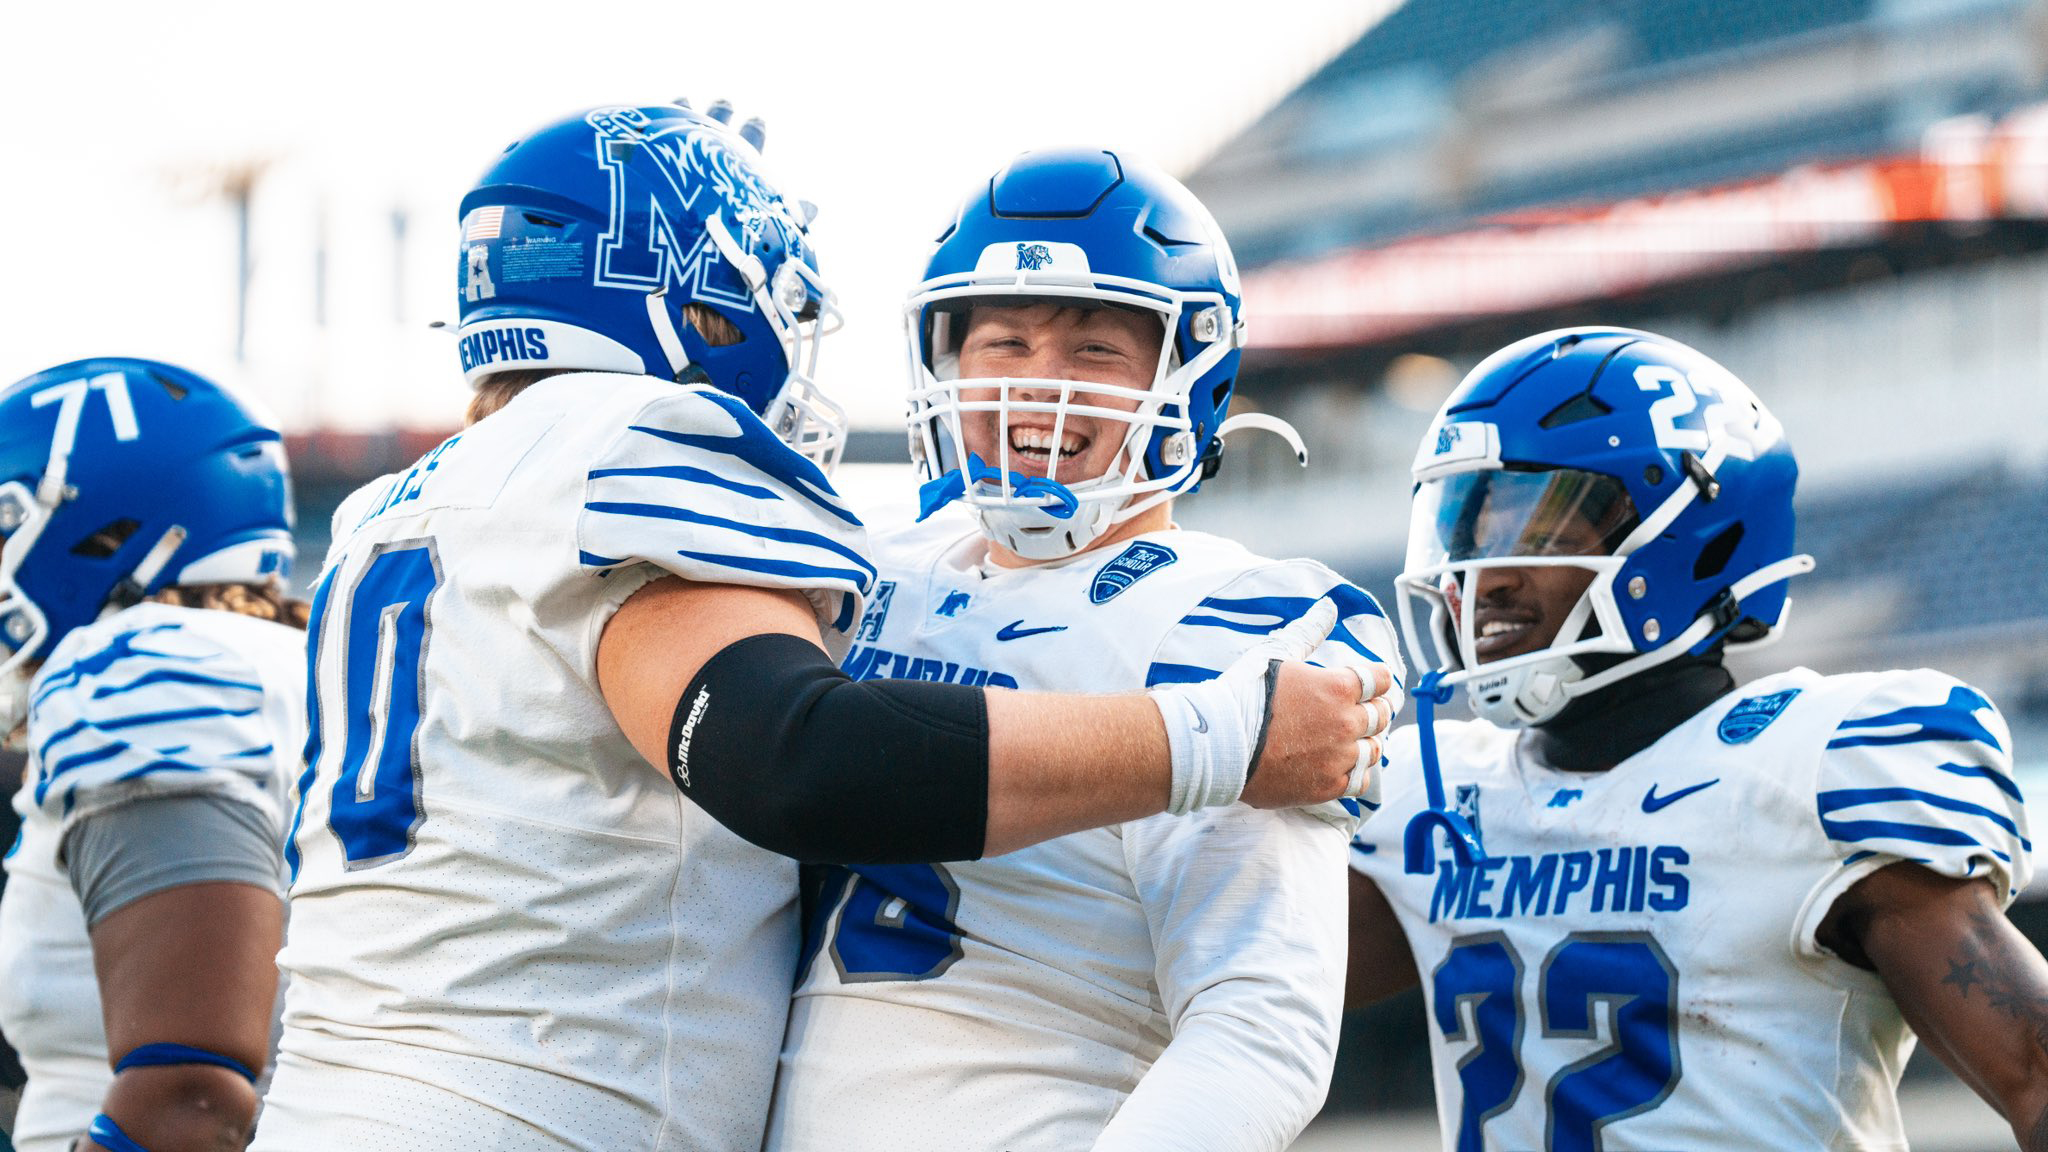 Brendan Doyle fits right in at Memphis